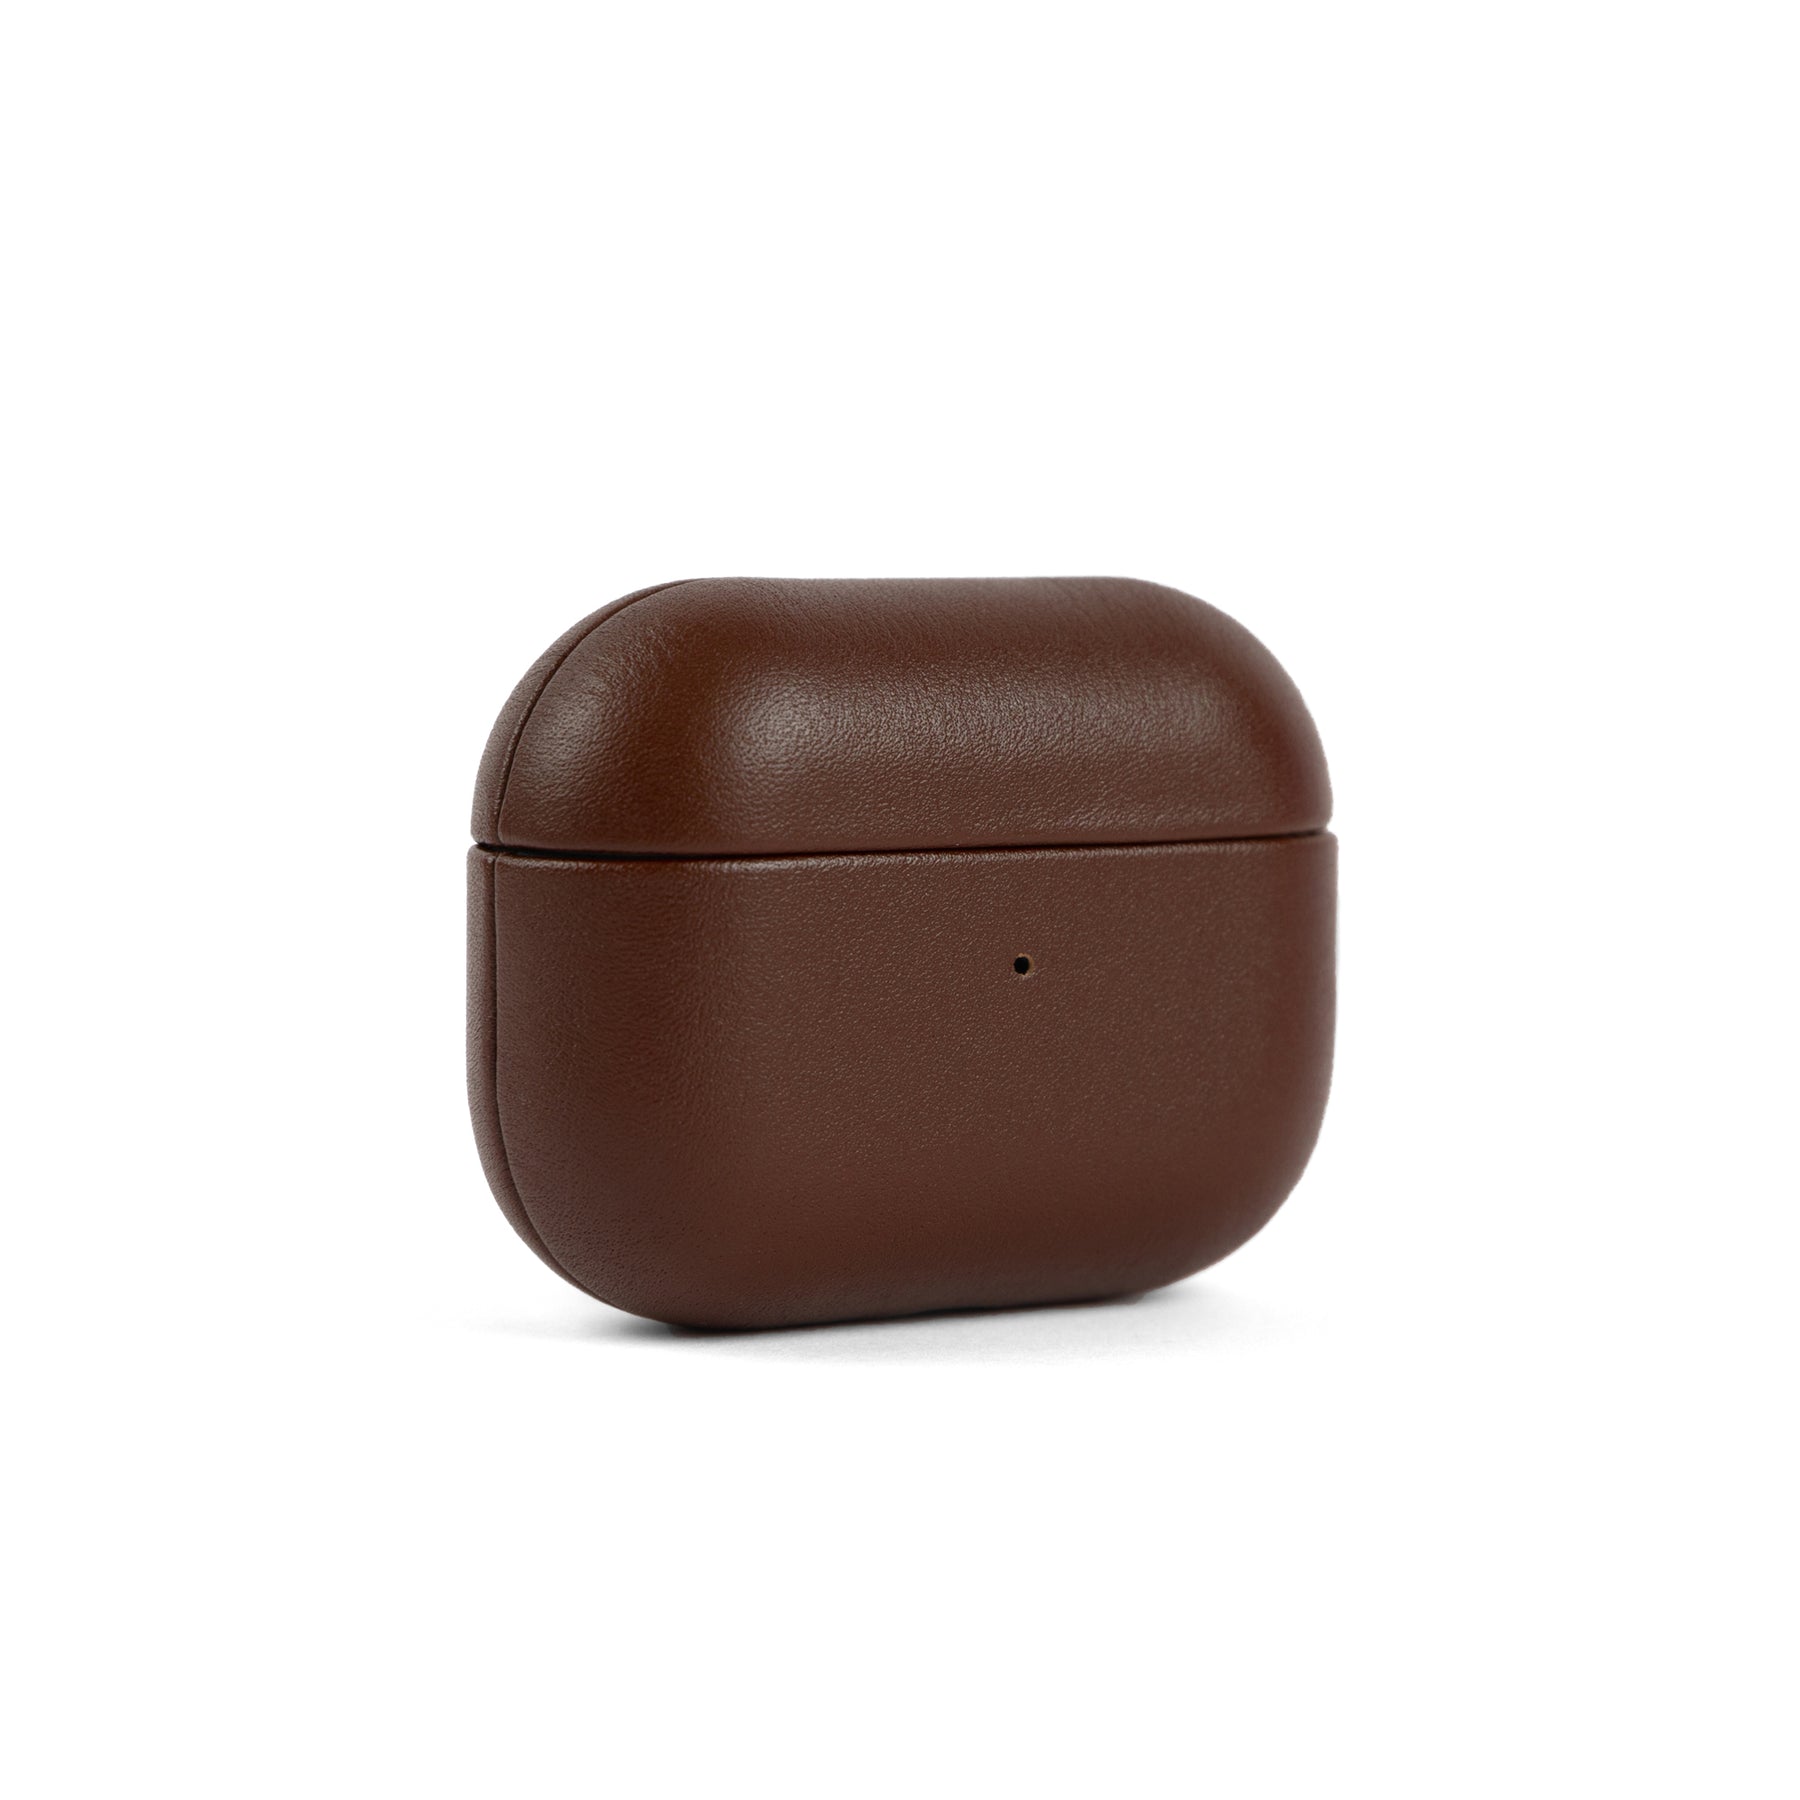 brown Apple Airpod Pro Case, For Airpods